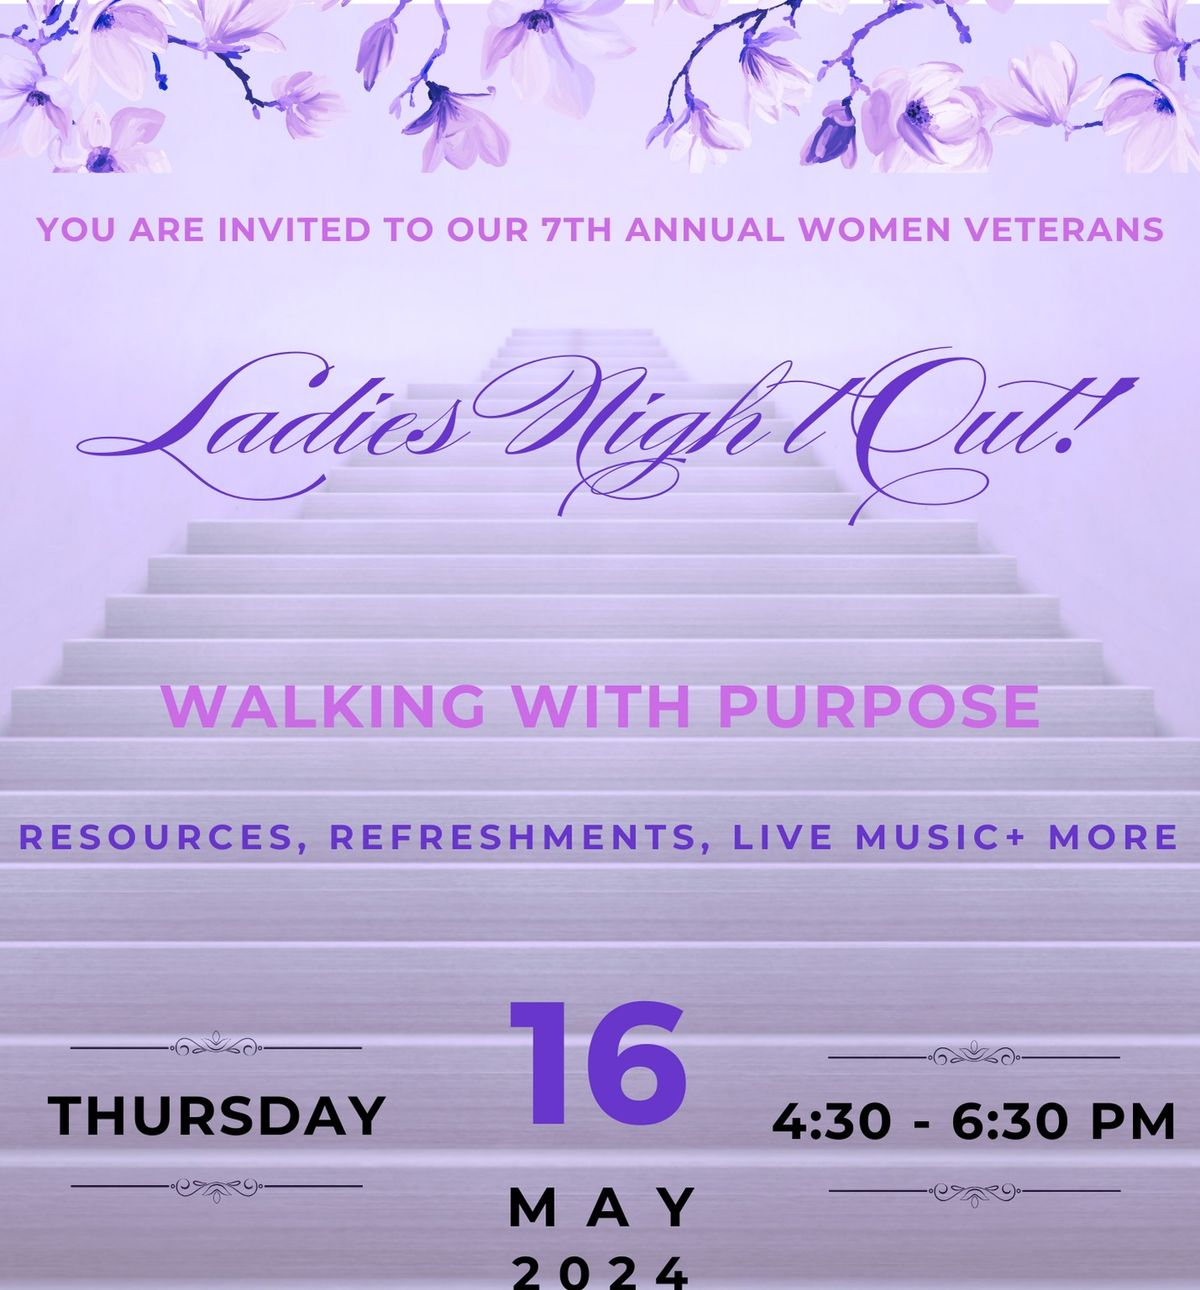 Women Veterans' Ladies Night Out Event